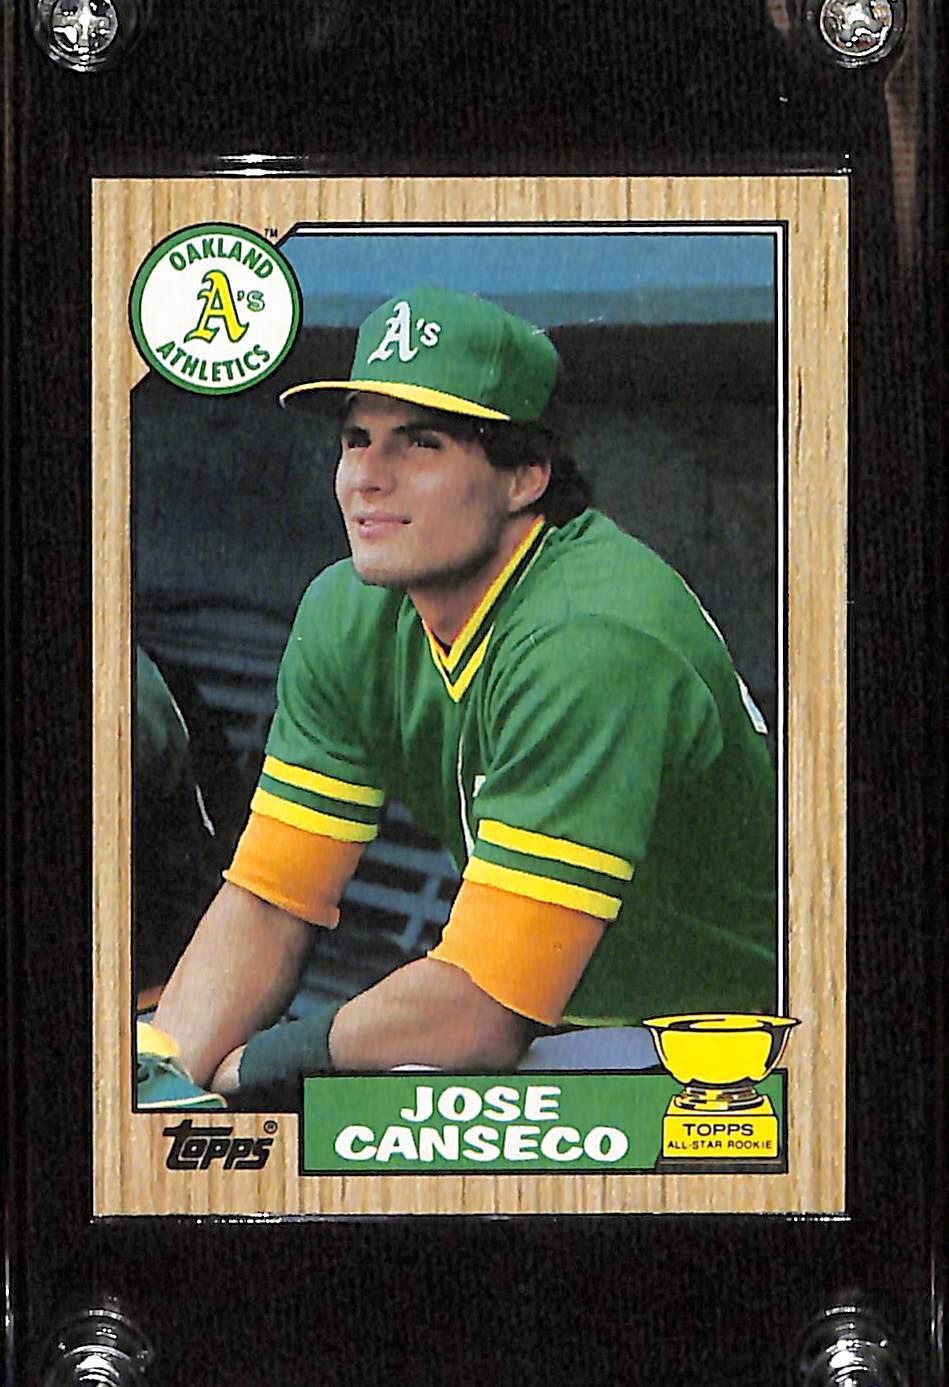 FIINR Baseball Card 1987 Topps Jose Canseco Rookie MLB Baseball Card #620 - Rookie Card - Mint Condition